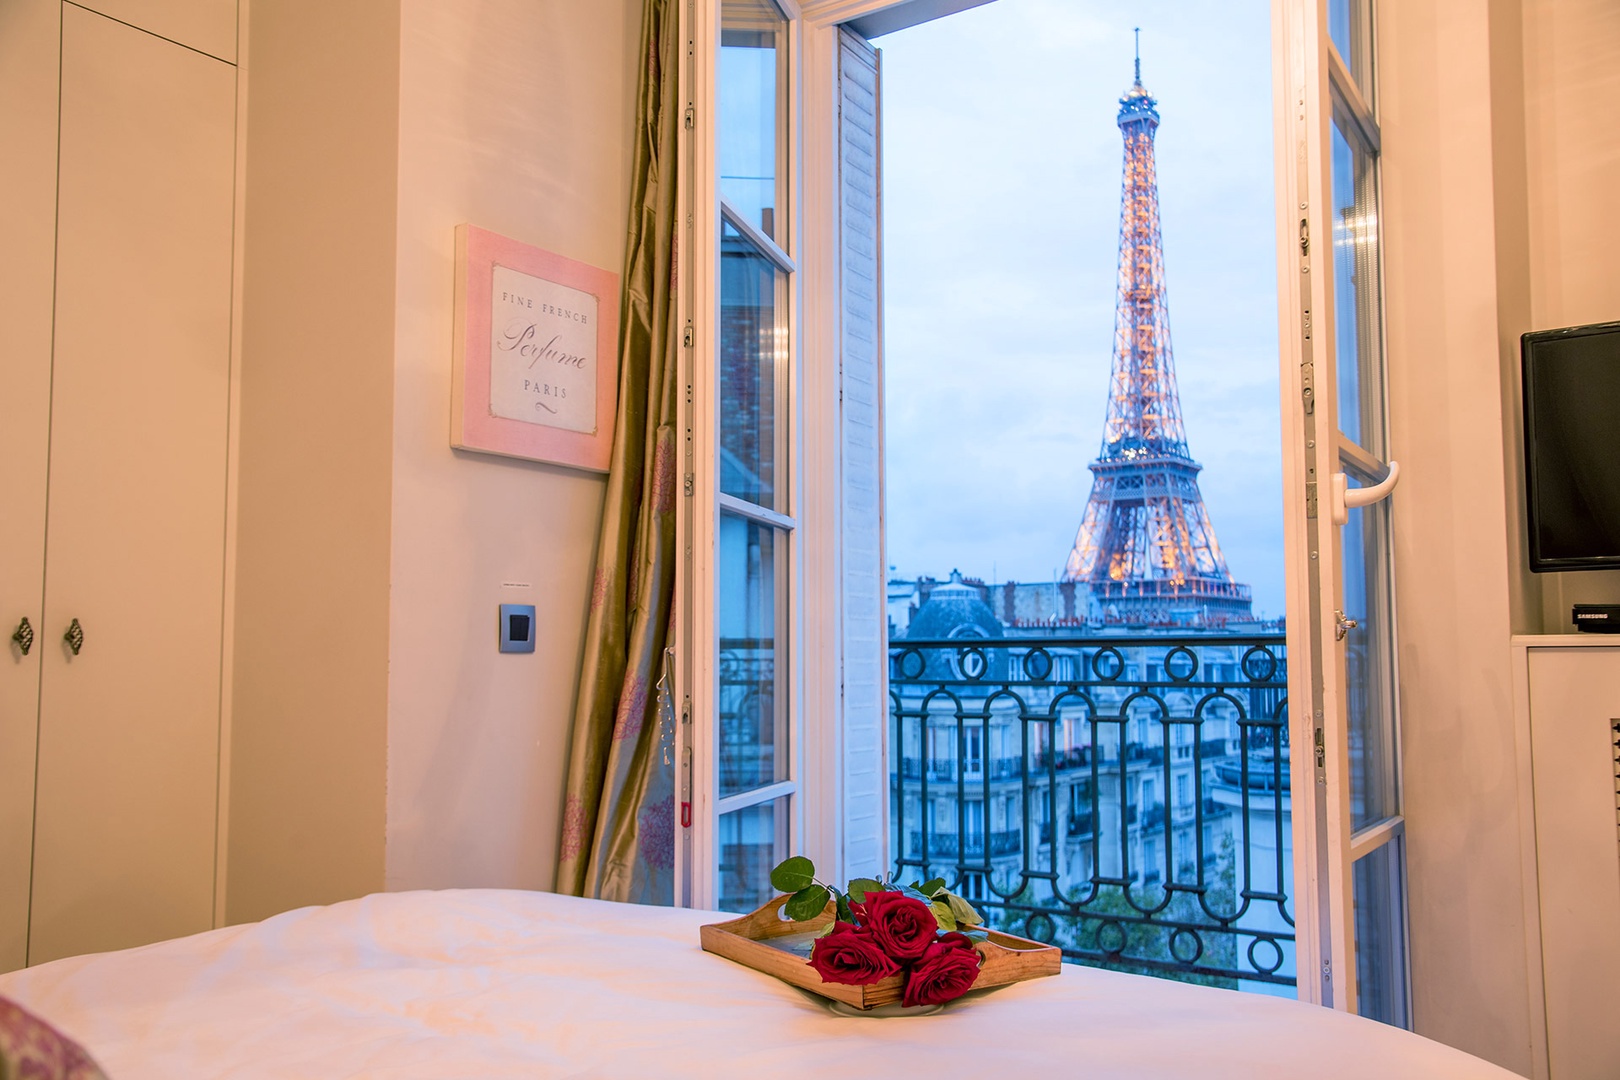 Watch the sunset and the Eiffel Tower light up at night right from your bed!